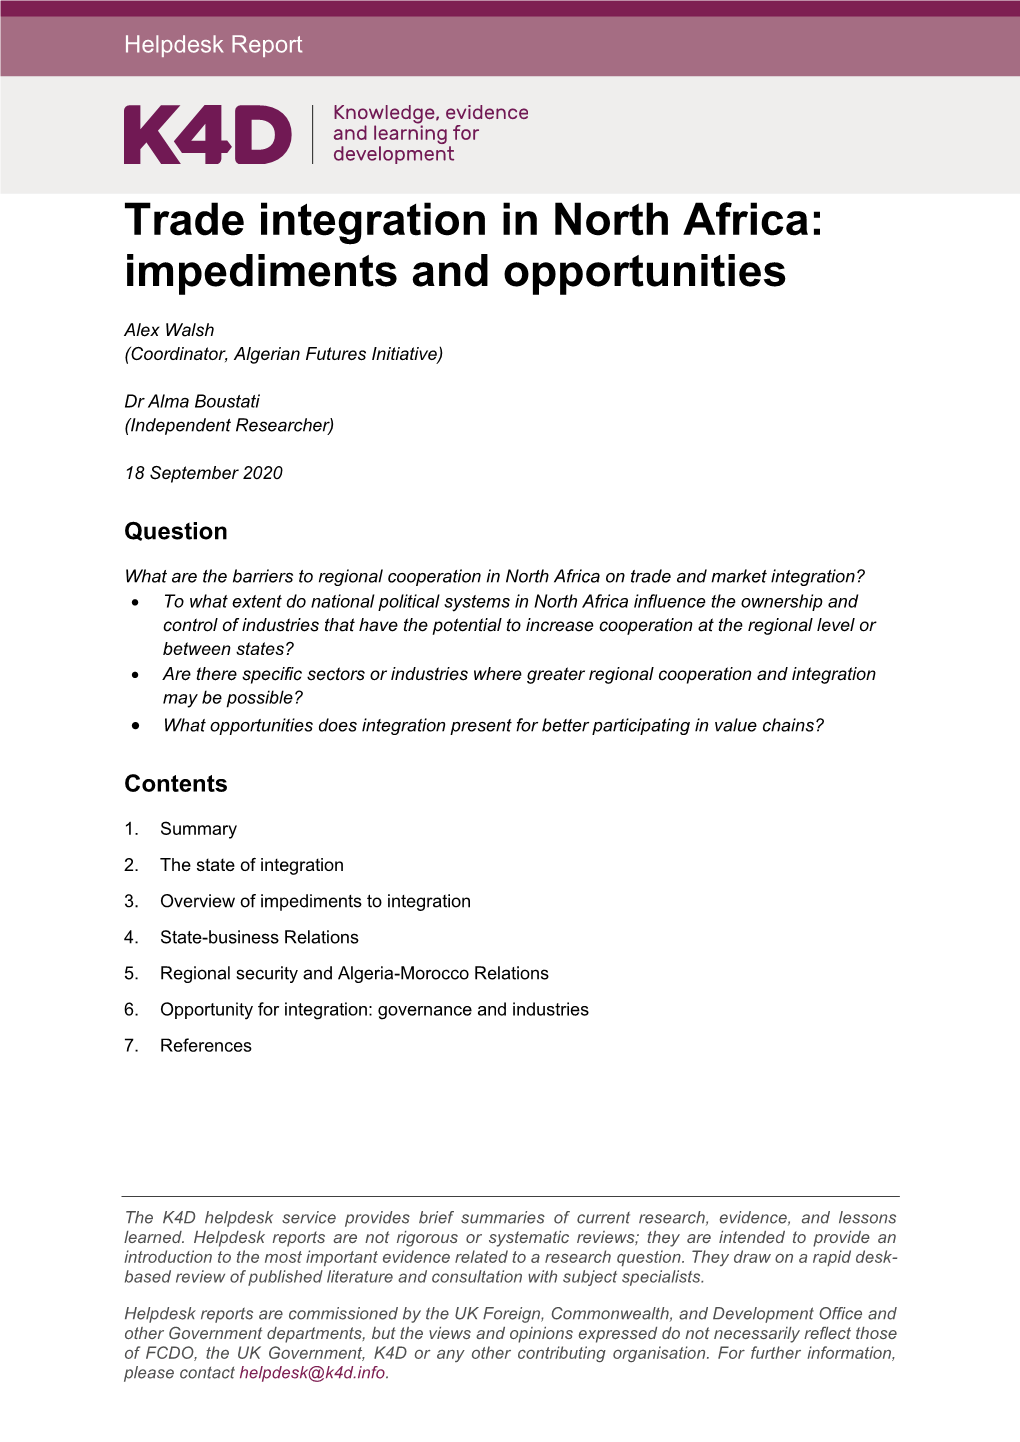 Trade Integration in North Africa: Impediments and Opportunities